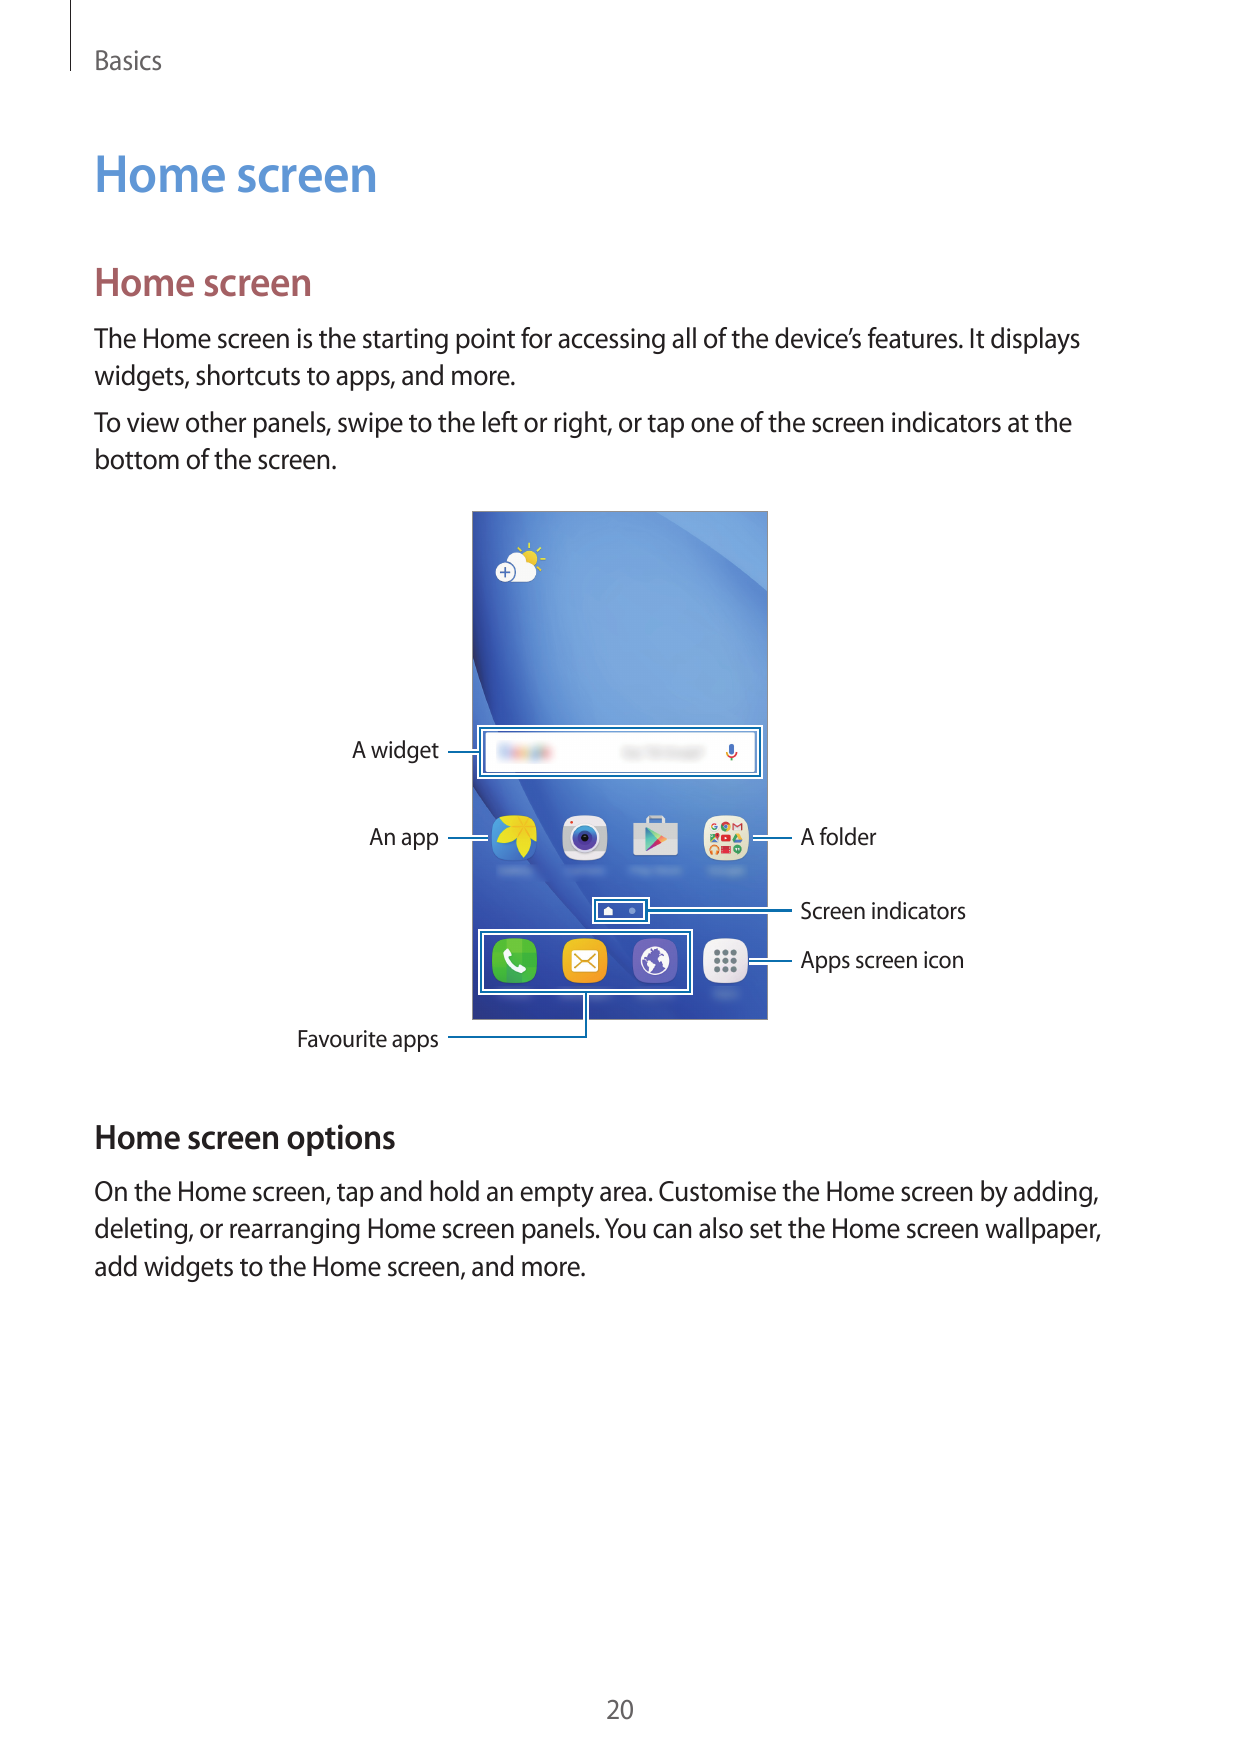 BasicsHome screenHome screenThe Home screen is the starting point for accessing all of the device’s features. It displayswidgets